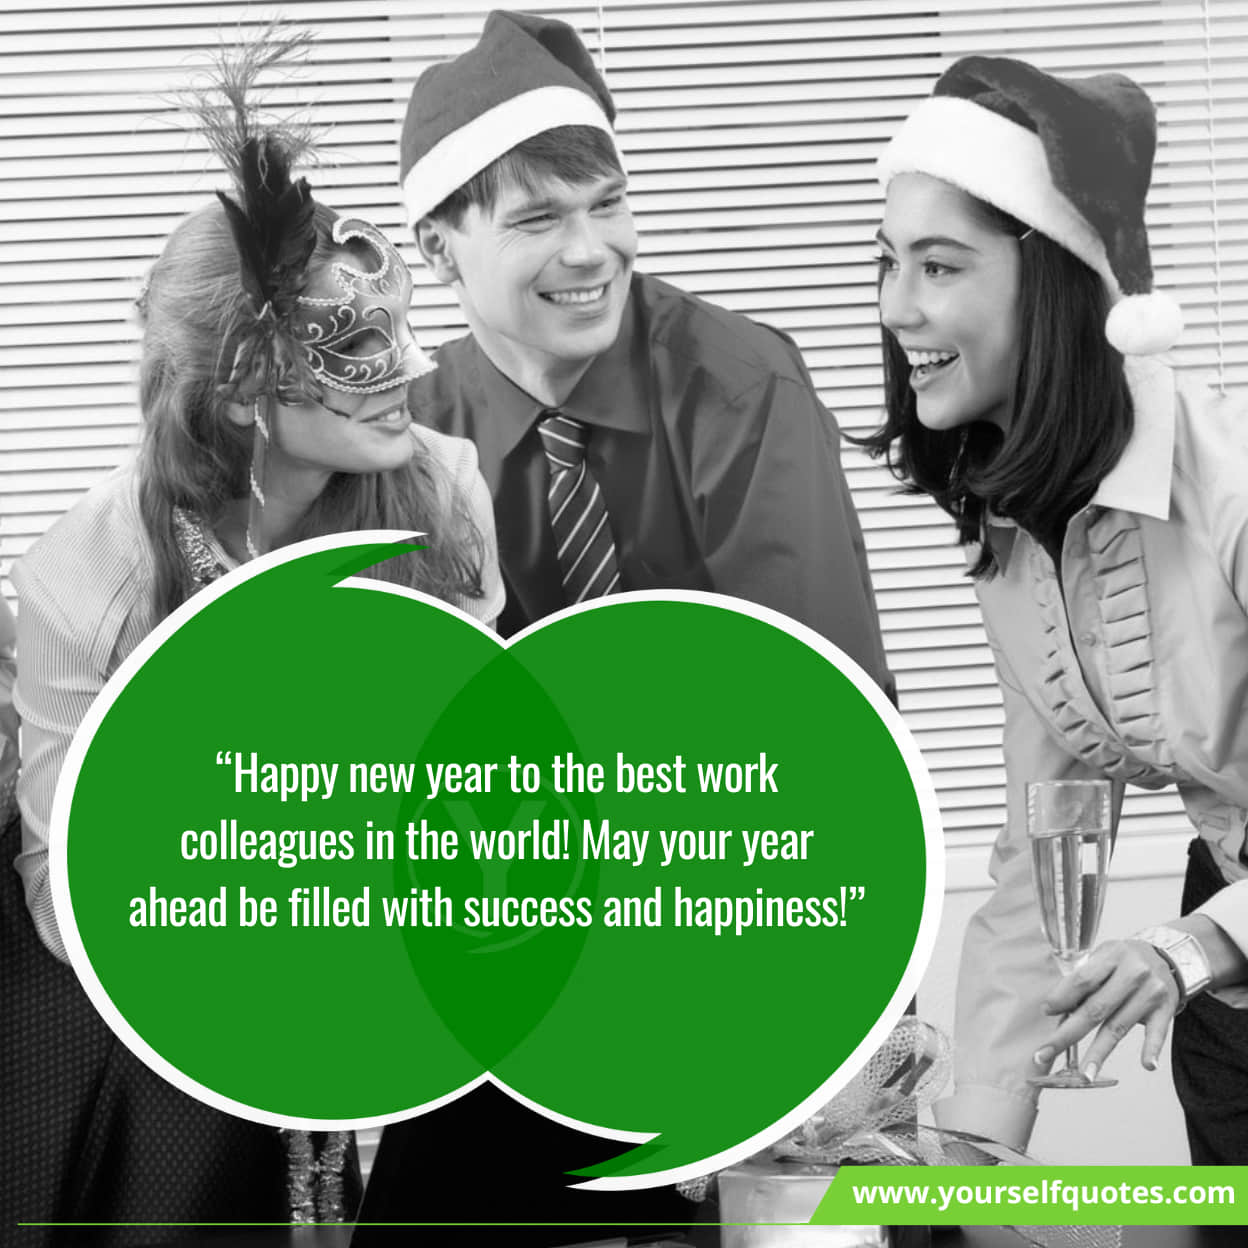 New Year Wishes For Colleagues